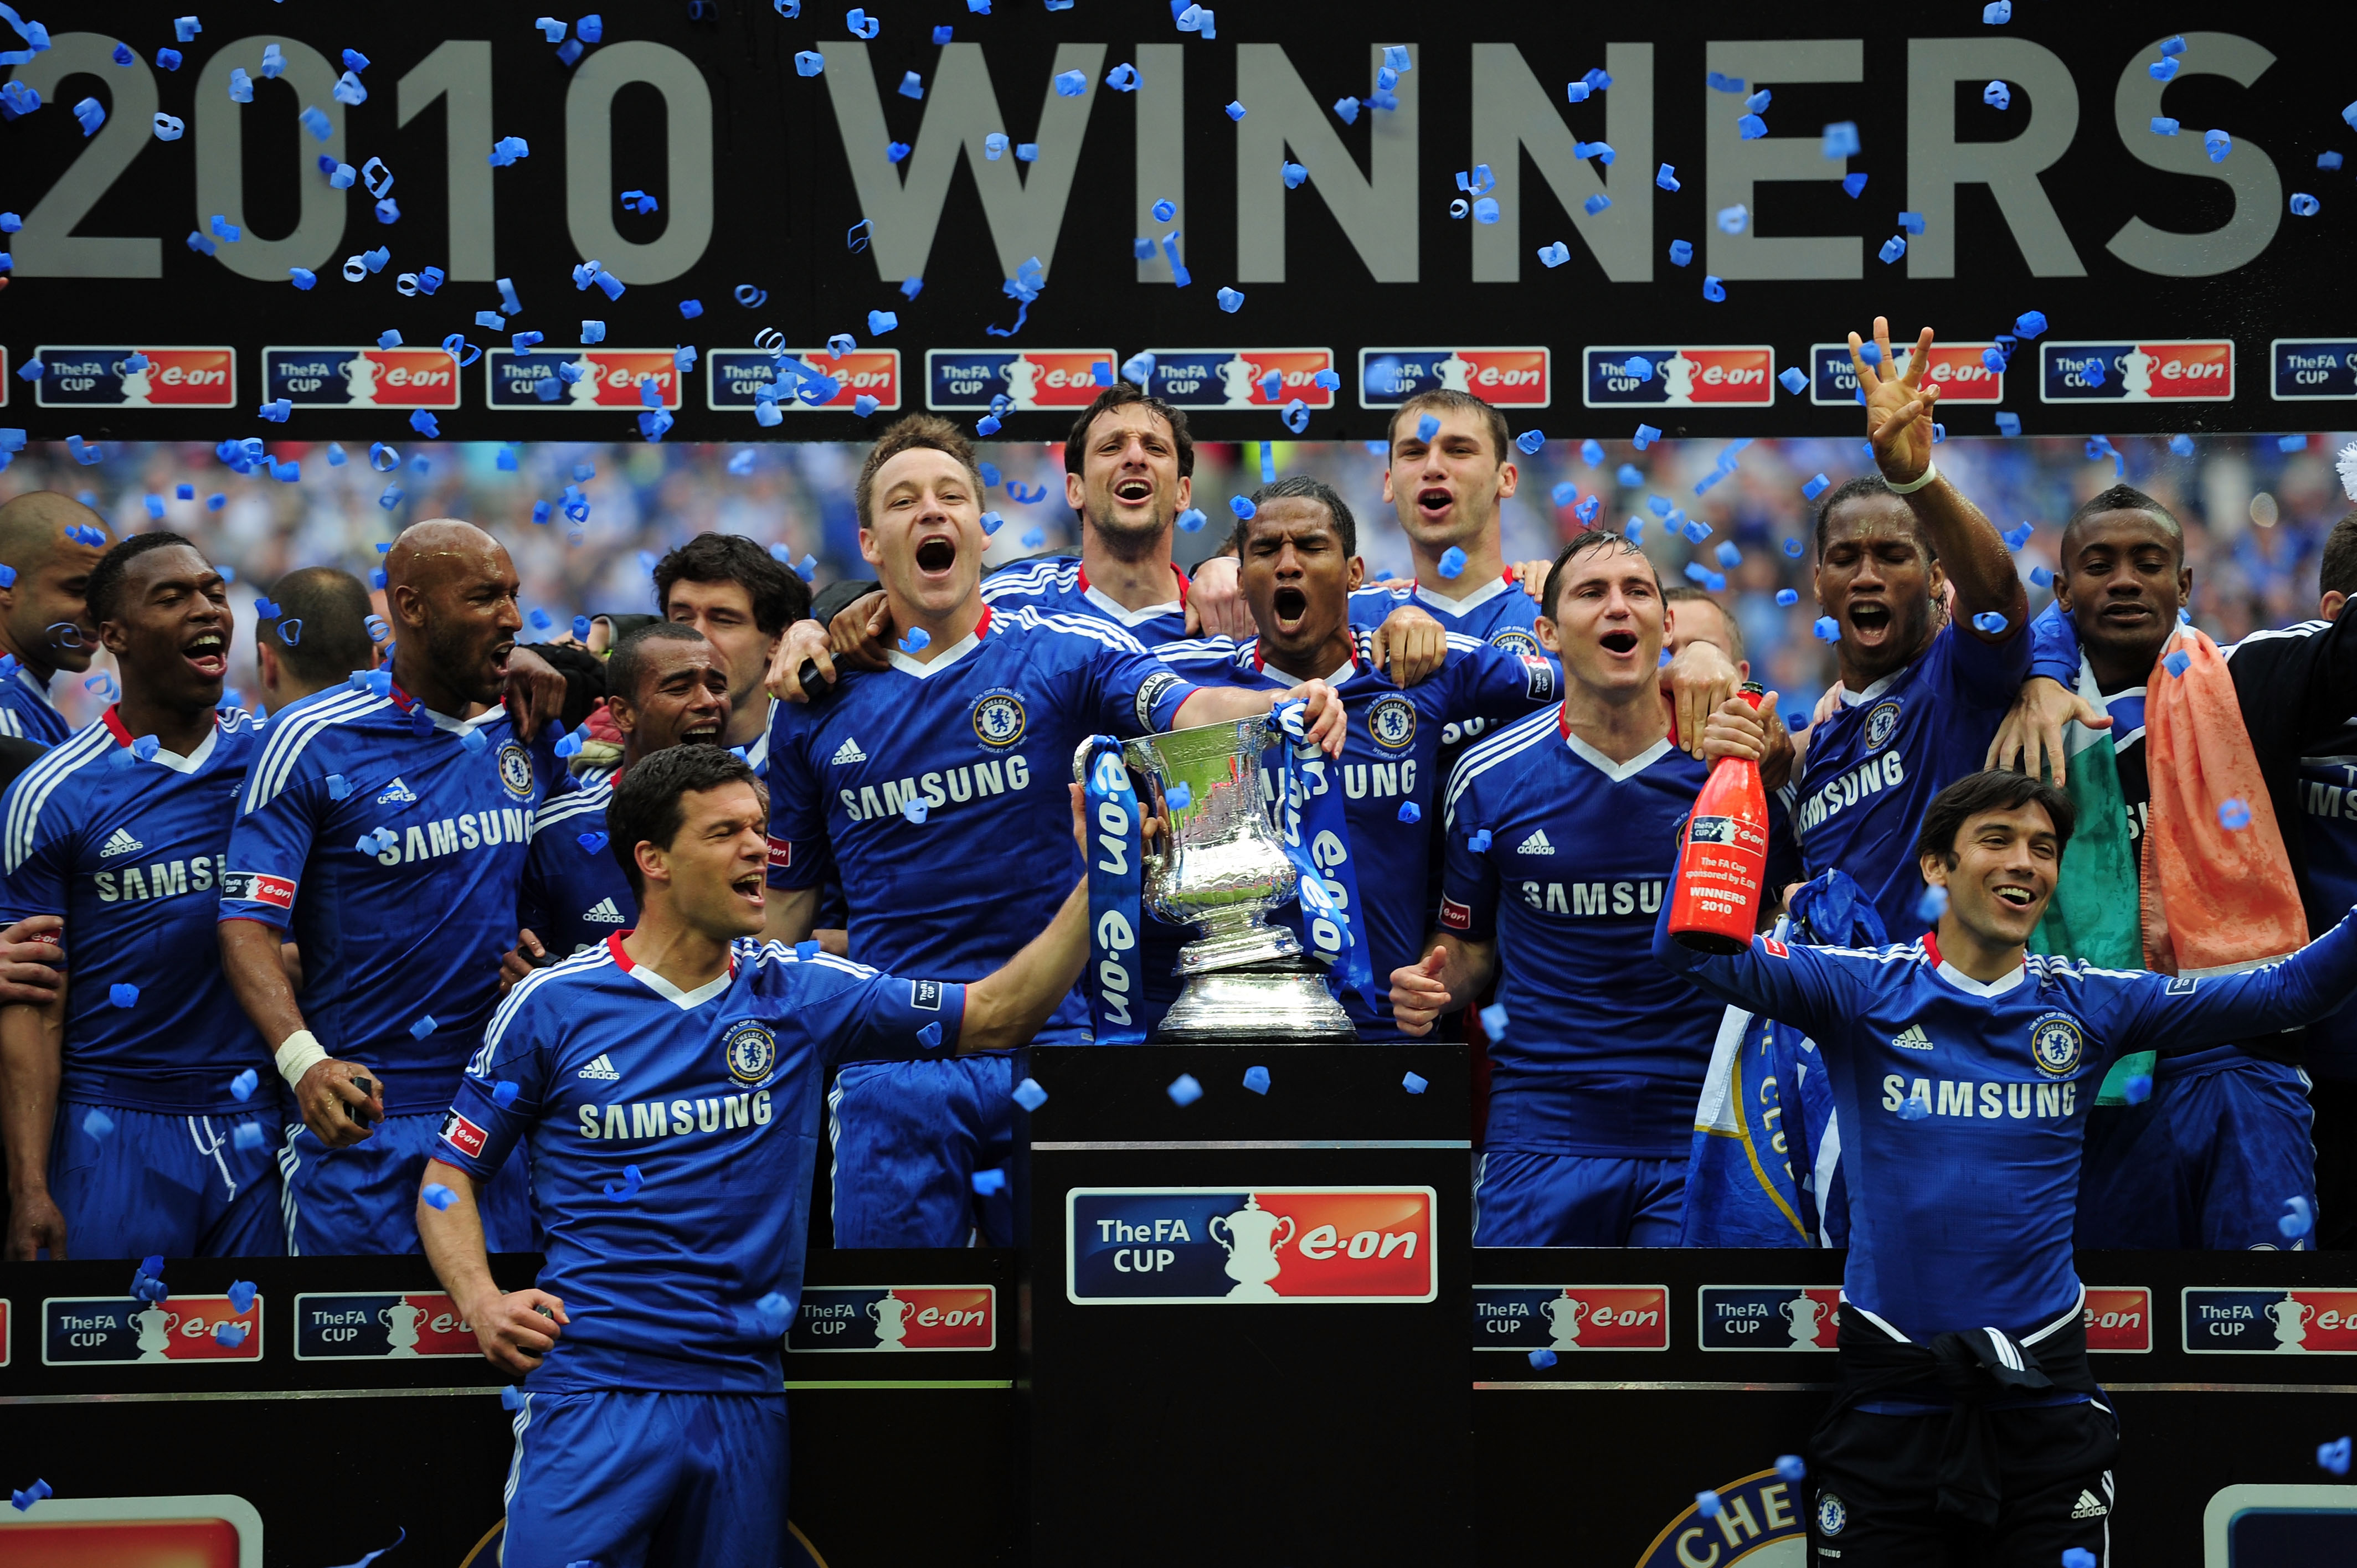 LONDON, ENGLAND - MAY 15:  John Terry of Chelsea leads the celebrations with his team after winning the FA Cup sponsored by E.ON Final match between Chelsea and Portsmouth at Wembley Stadium on May 15, 2010 in London, England.  (Photo by Shaun Botterill/G